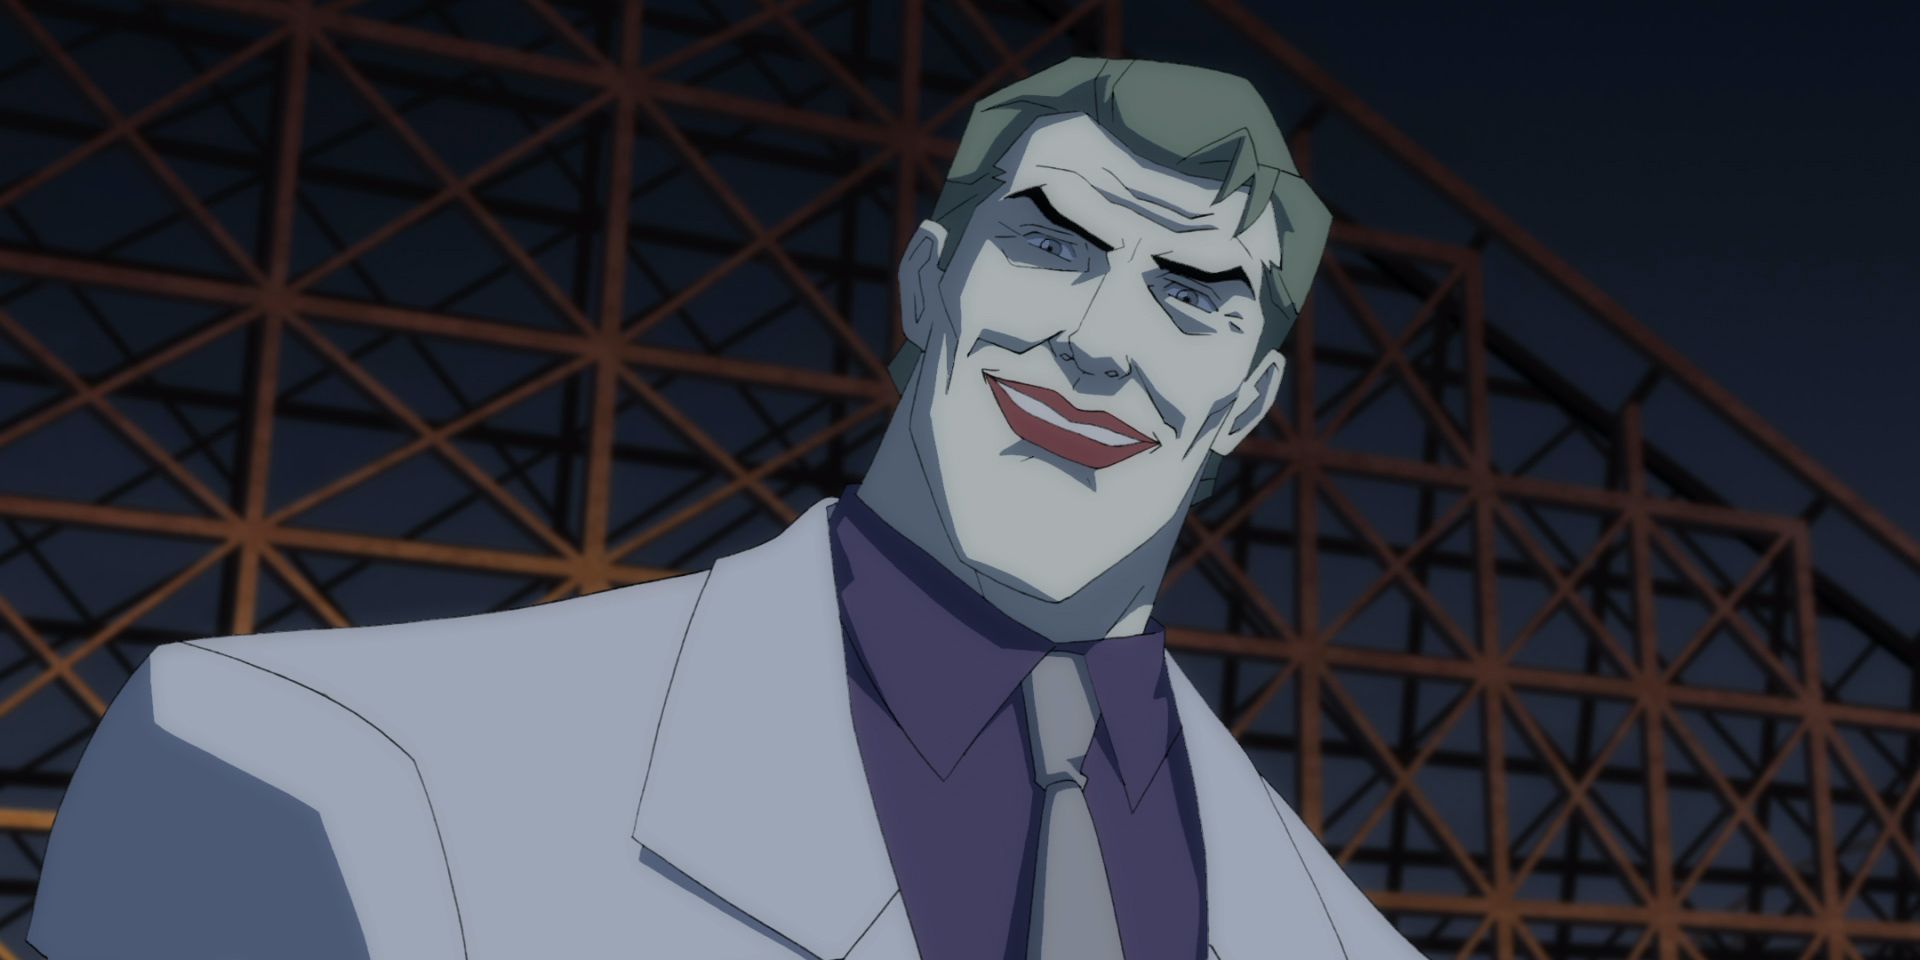 Joker in front of the rollercoaster in The Dark Knight Returns Part 2